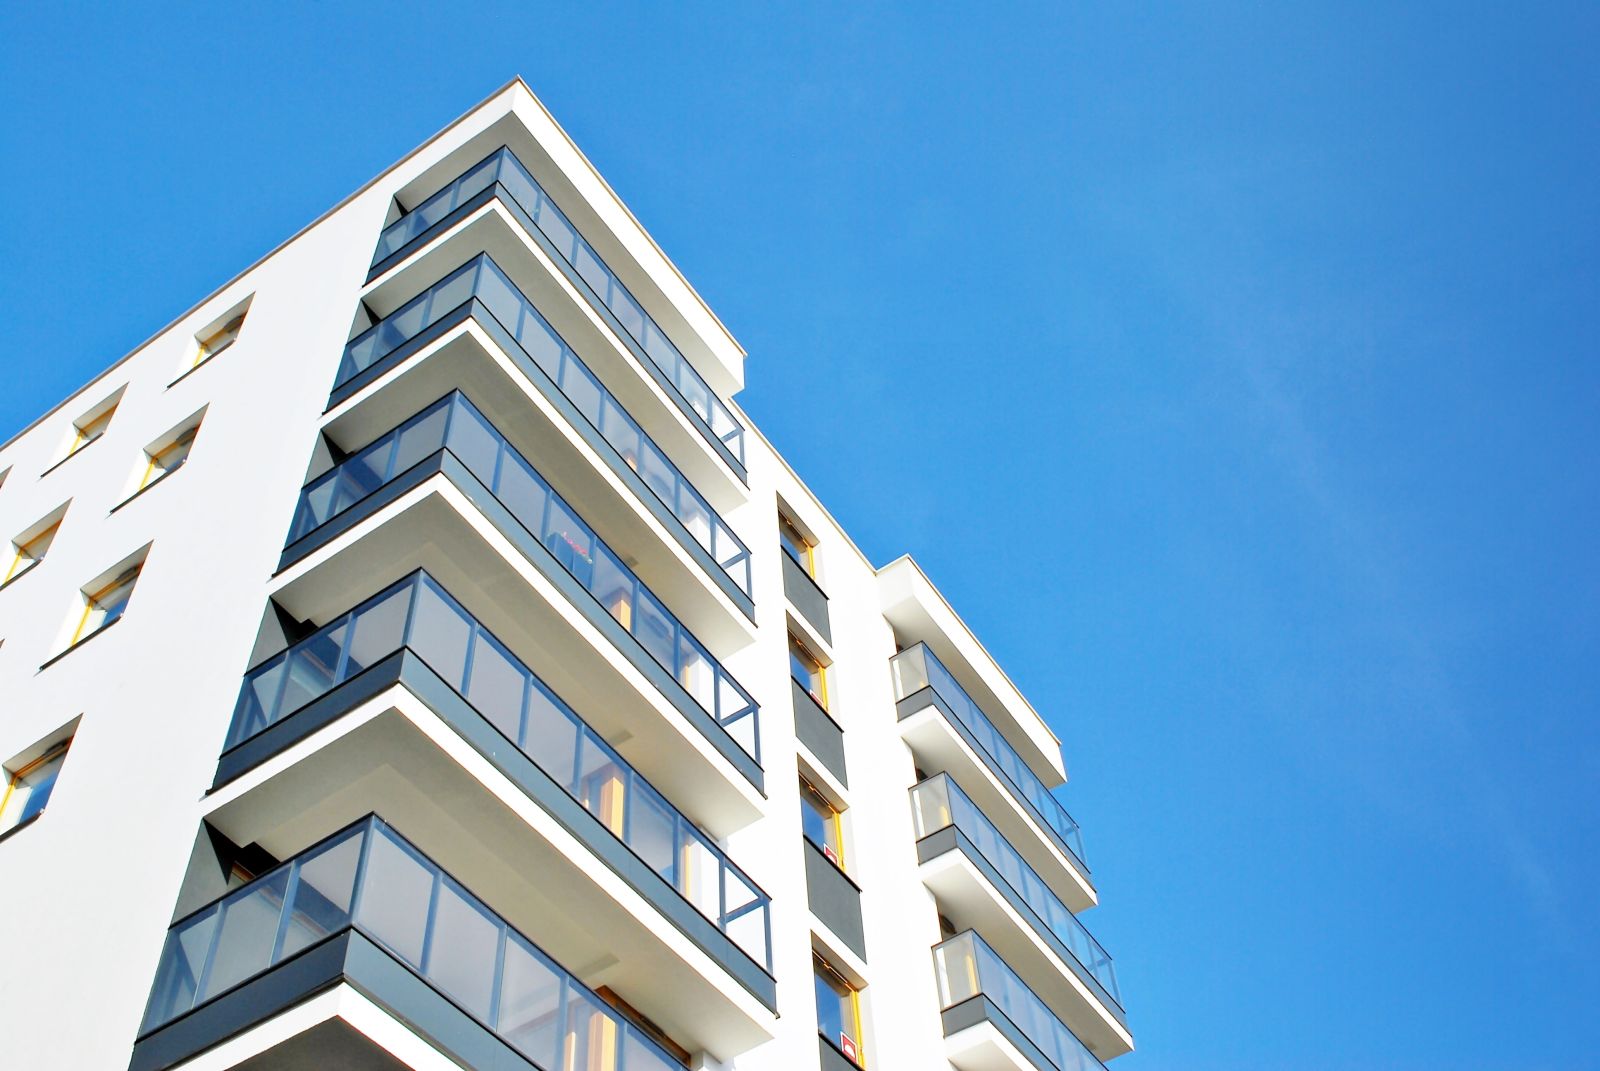 5 Ways To Invest In Multifamily Real Estate This Year